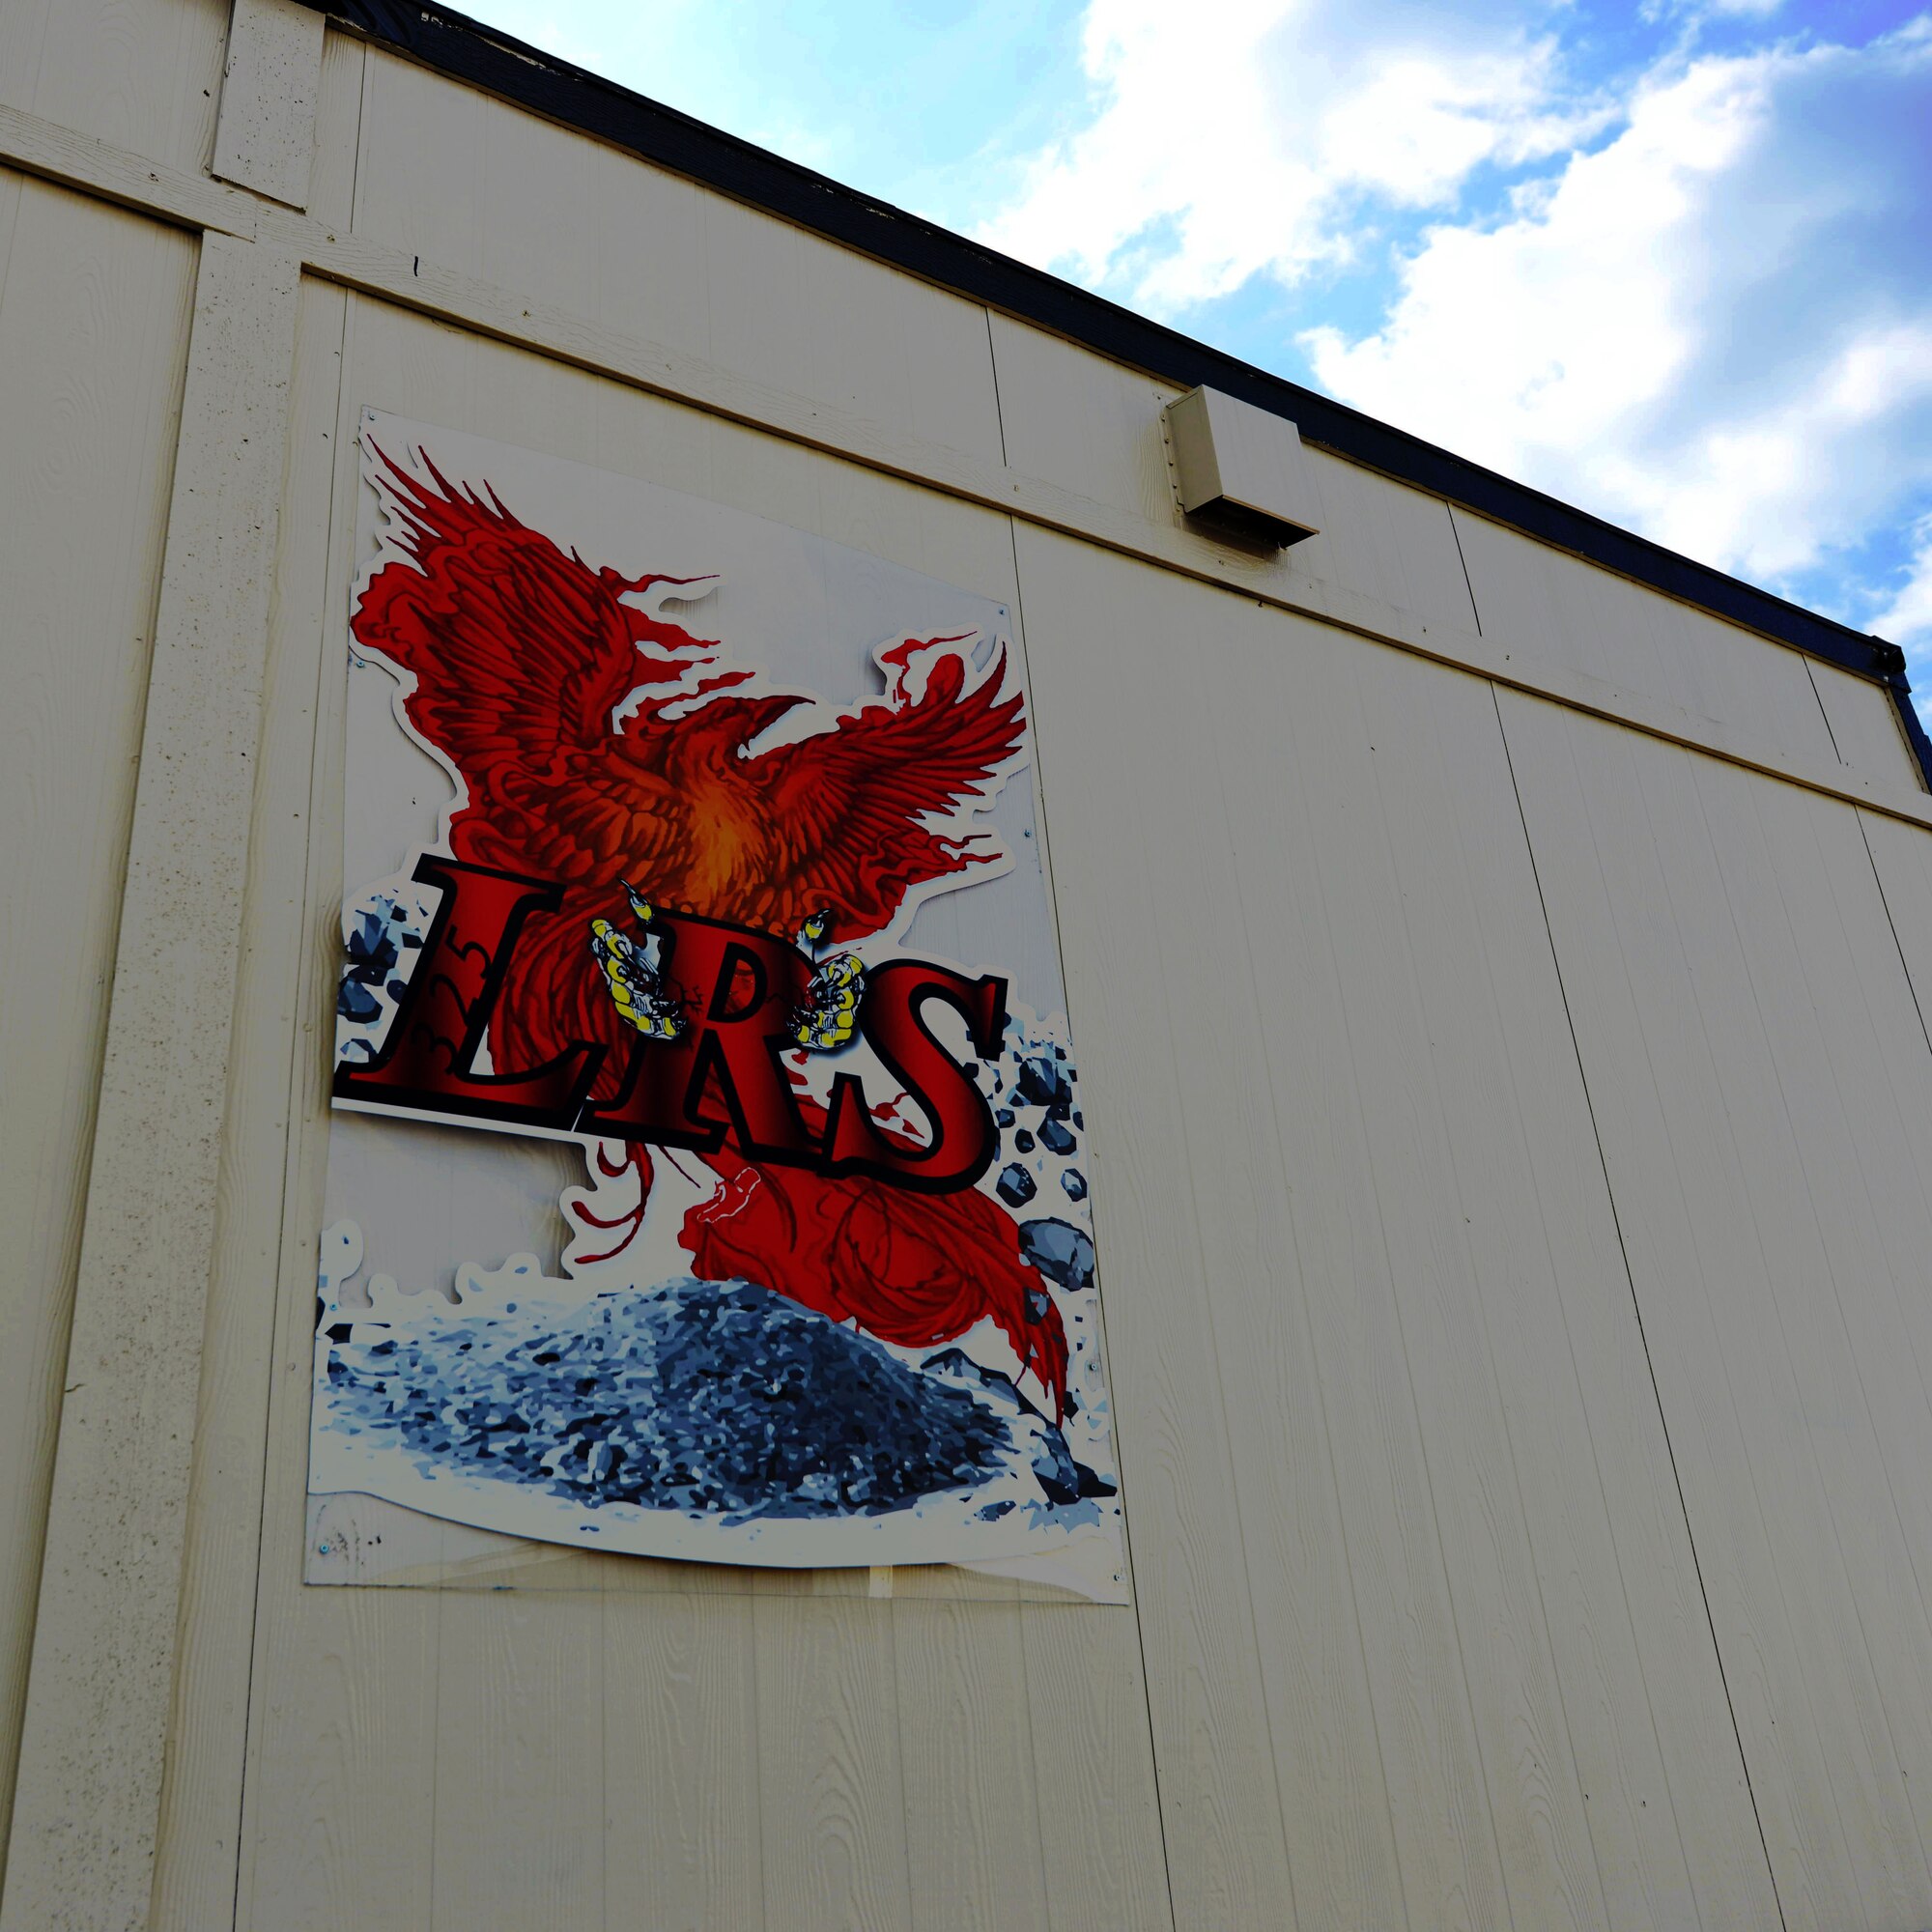 Unit artwork is displayed at the 325th Logistics Readiness Squadron on Oct. 1, 2019, at Tyndall Air Force Base, Florida. The squadron recently vacated 500,080 items from the unit’s warehouse, which was permanently damaged by Hurricane Michael last year. (U.S. Air Force photo by Airman 1st Class Bailee A. Darbasie)